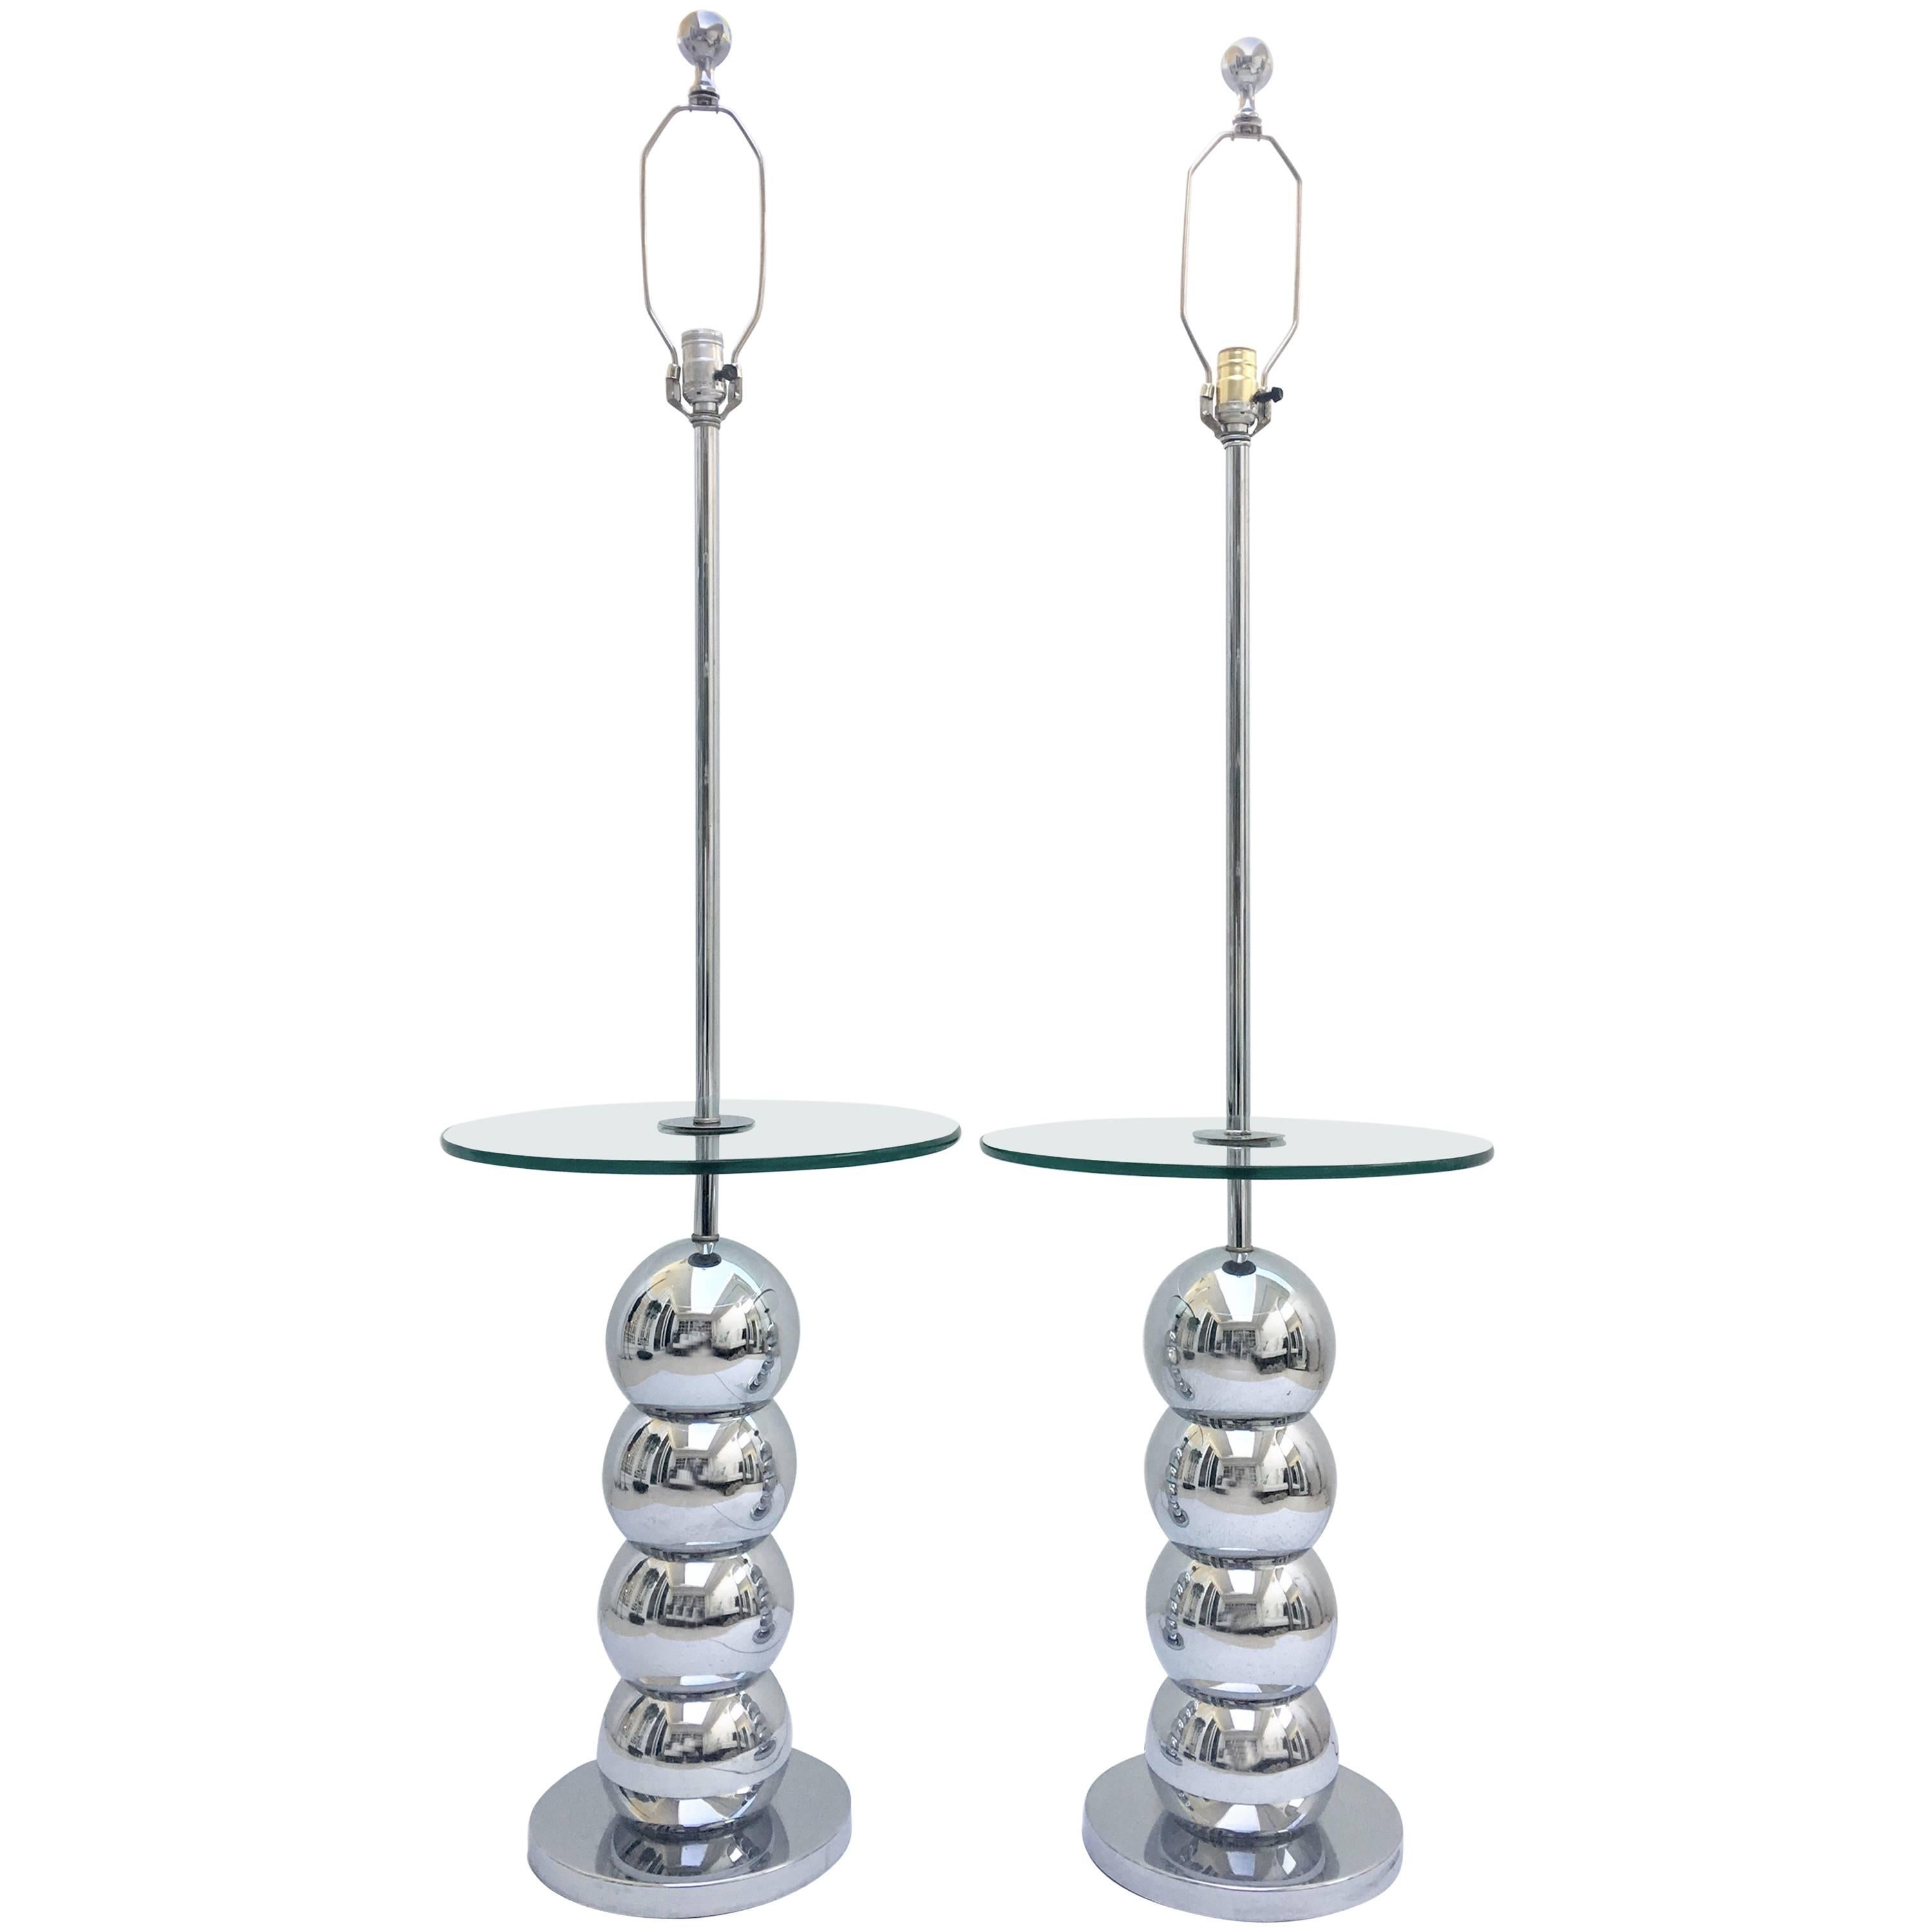 Pair of Mid-Century Modern Laurel Style Chrome Ball & Glass Table Floor Lamps For Sale